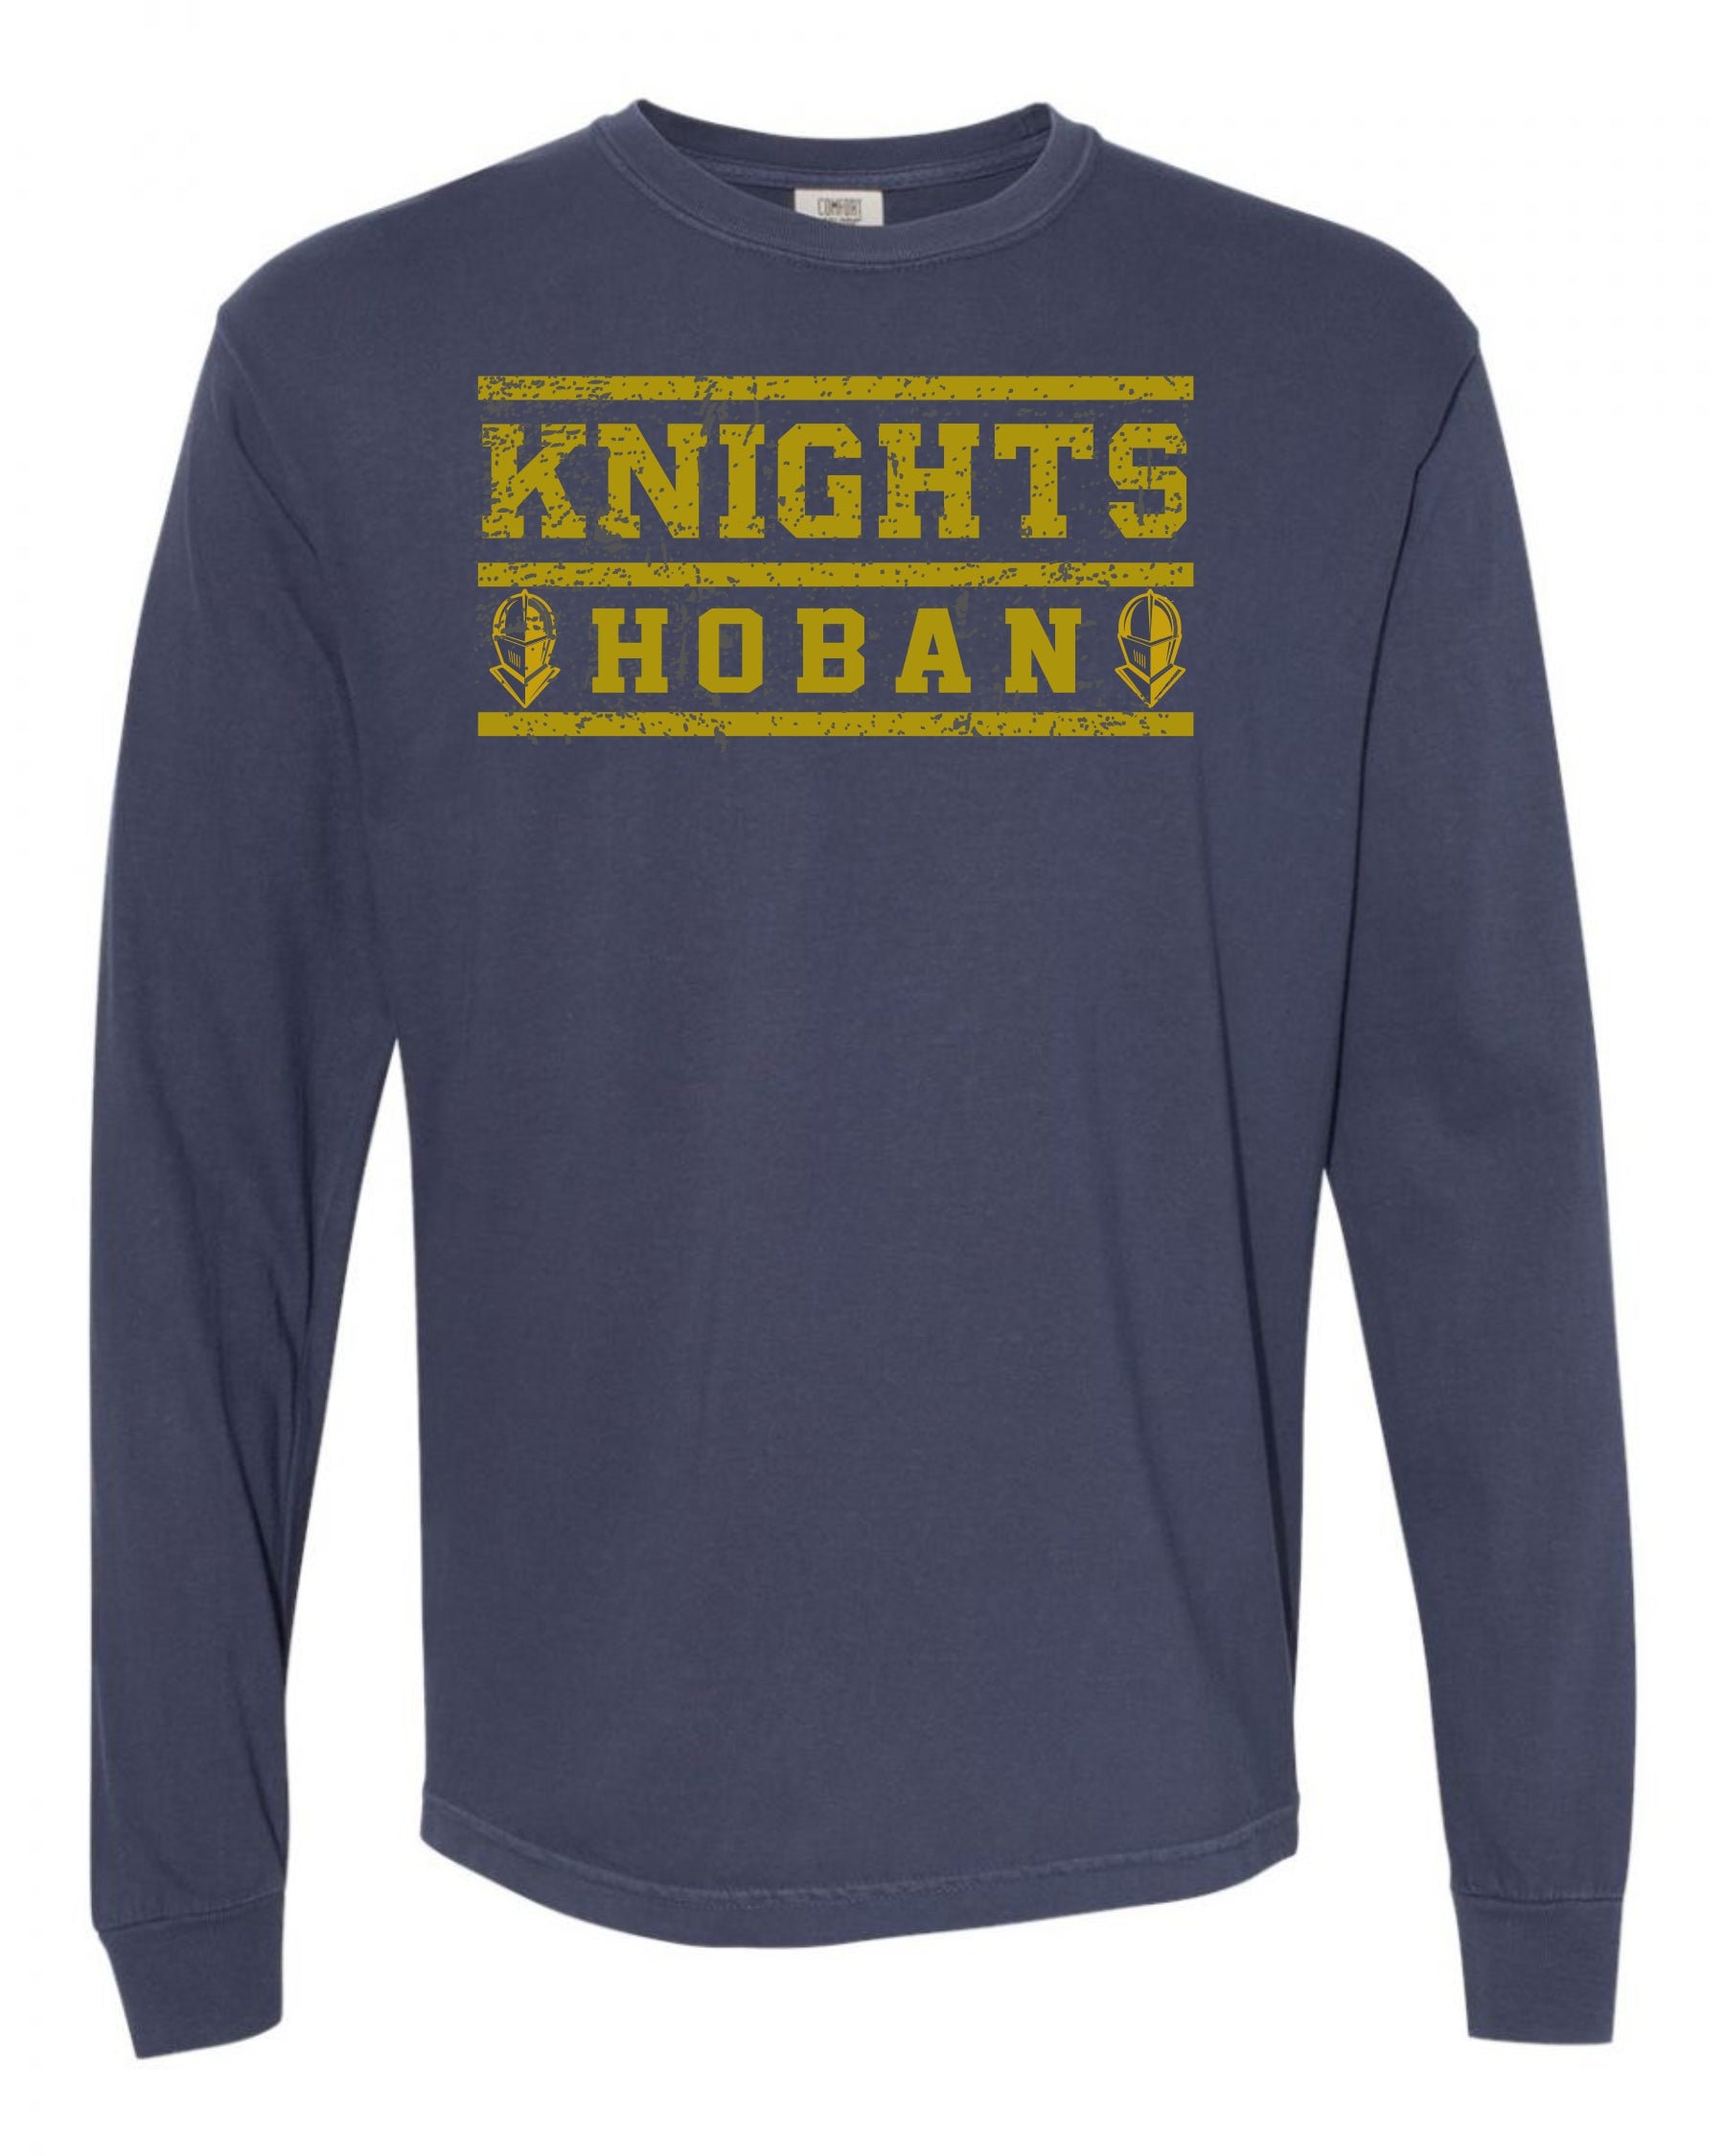 Long Sleeve T Shirt by Comfort Colors (click for more color options)